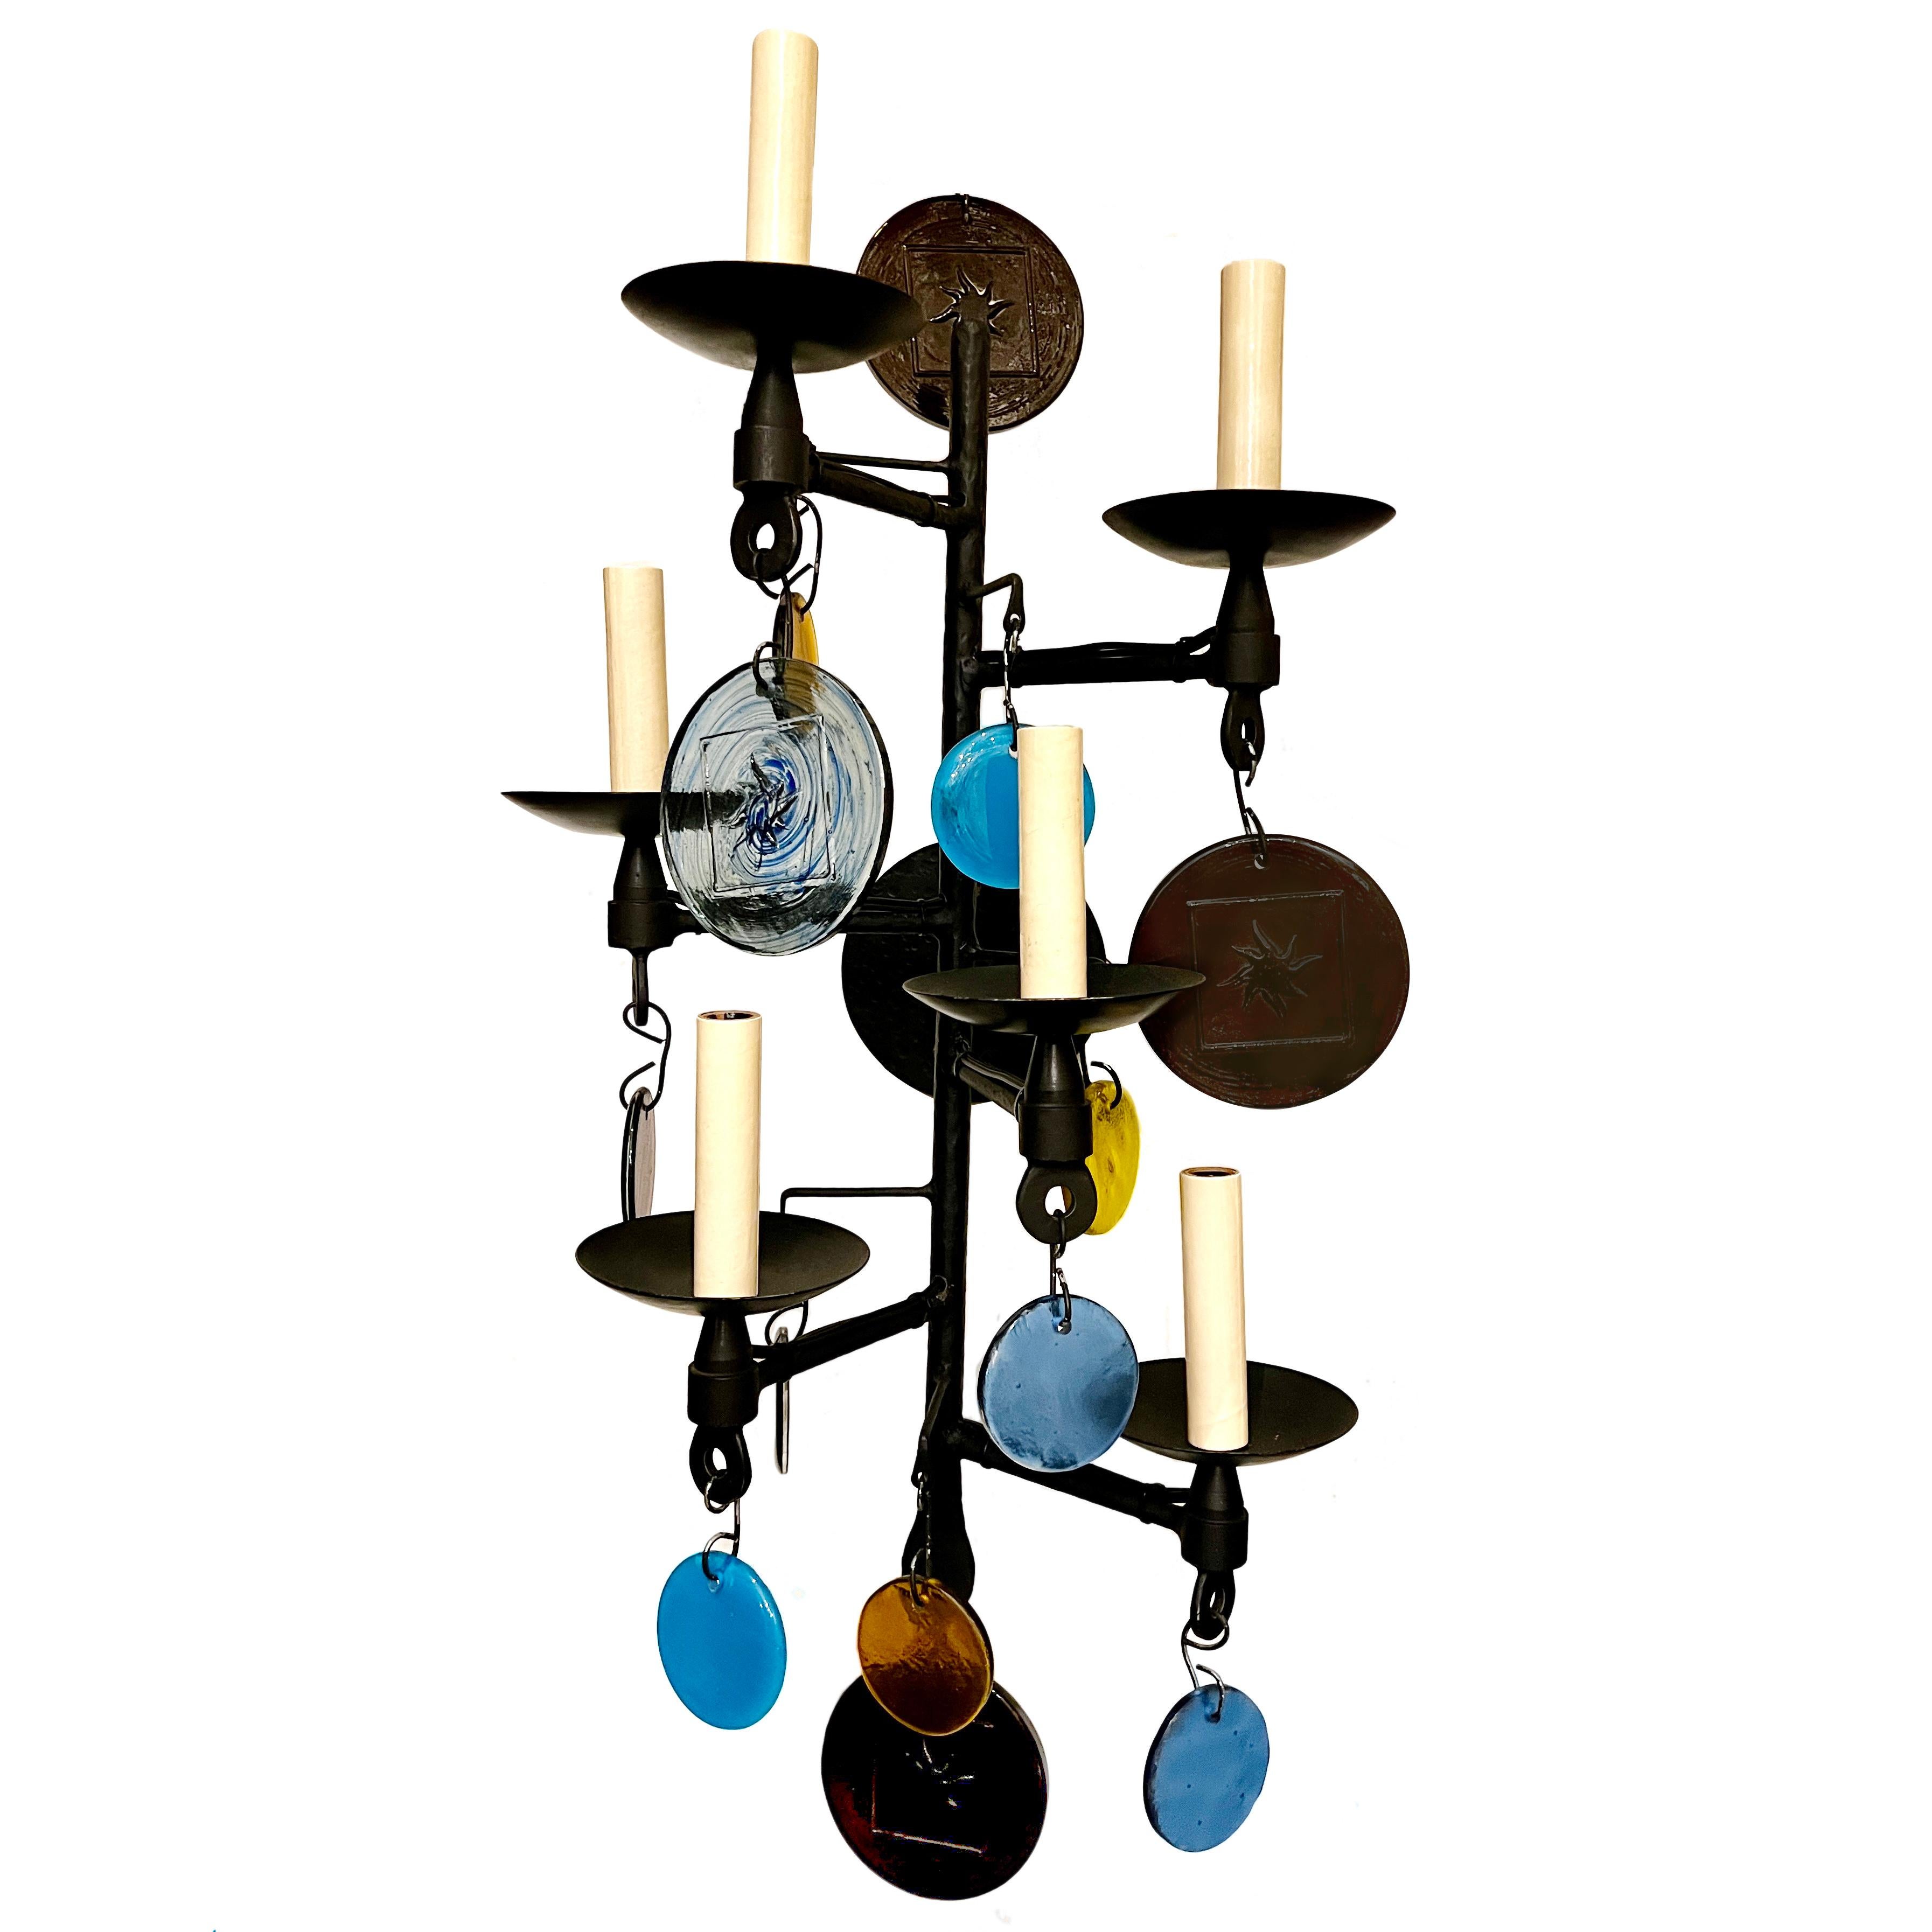 A pair of circa 1970's Swedish wrought iron sconces with molded glass and six candelabra lights each.

Measurements:
Height: 29